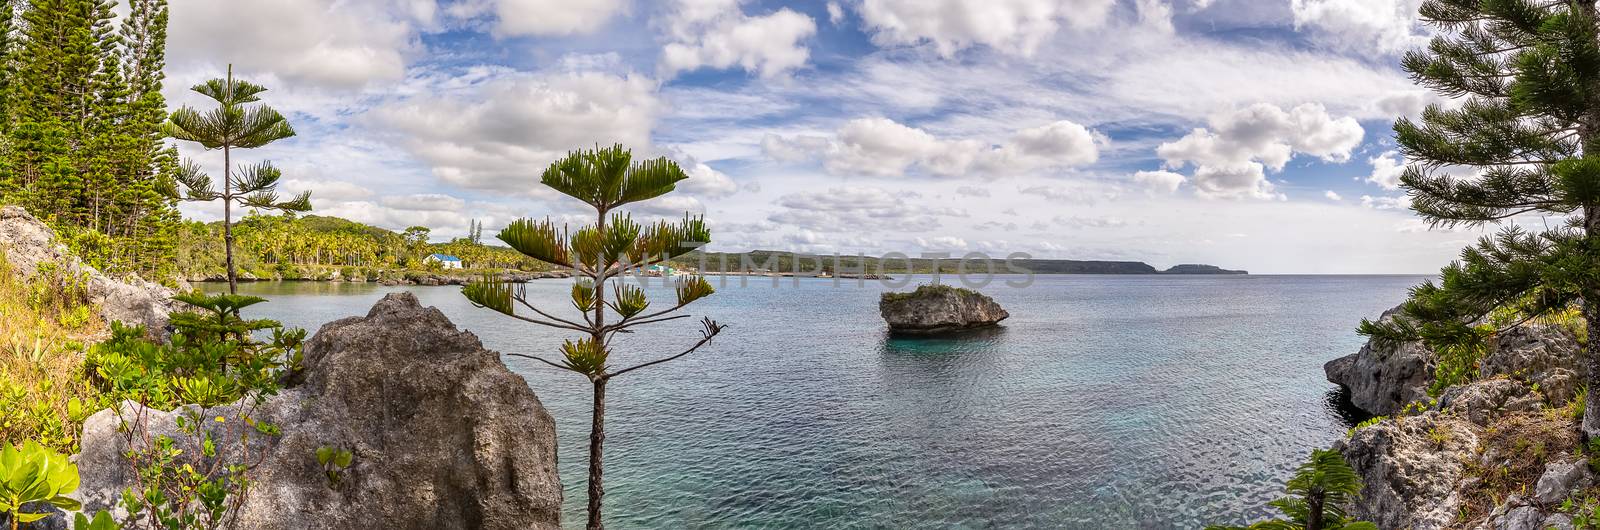 Amazing panoramic shot of Island of Mare in New Caledonia. Lone massive cliff in the water next to the island. Trees and rocks in the foreground. Blue cloudy sky as a background by DamantisZ